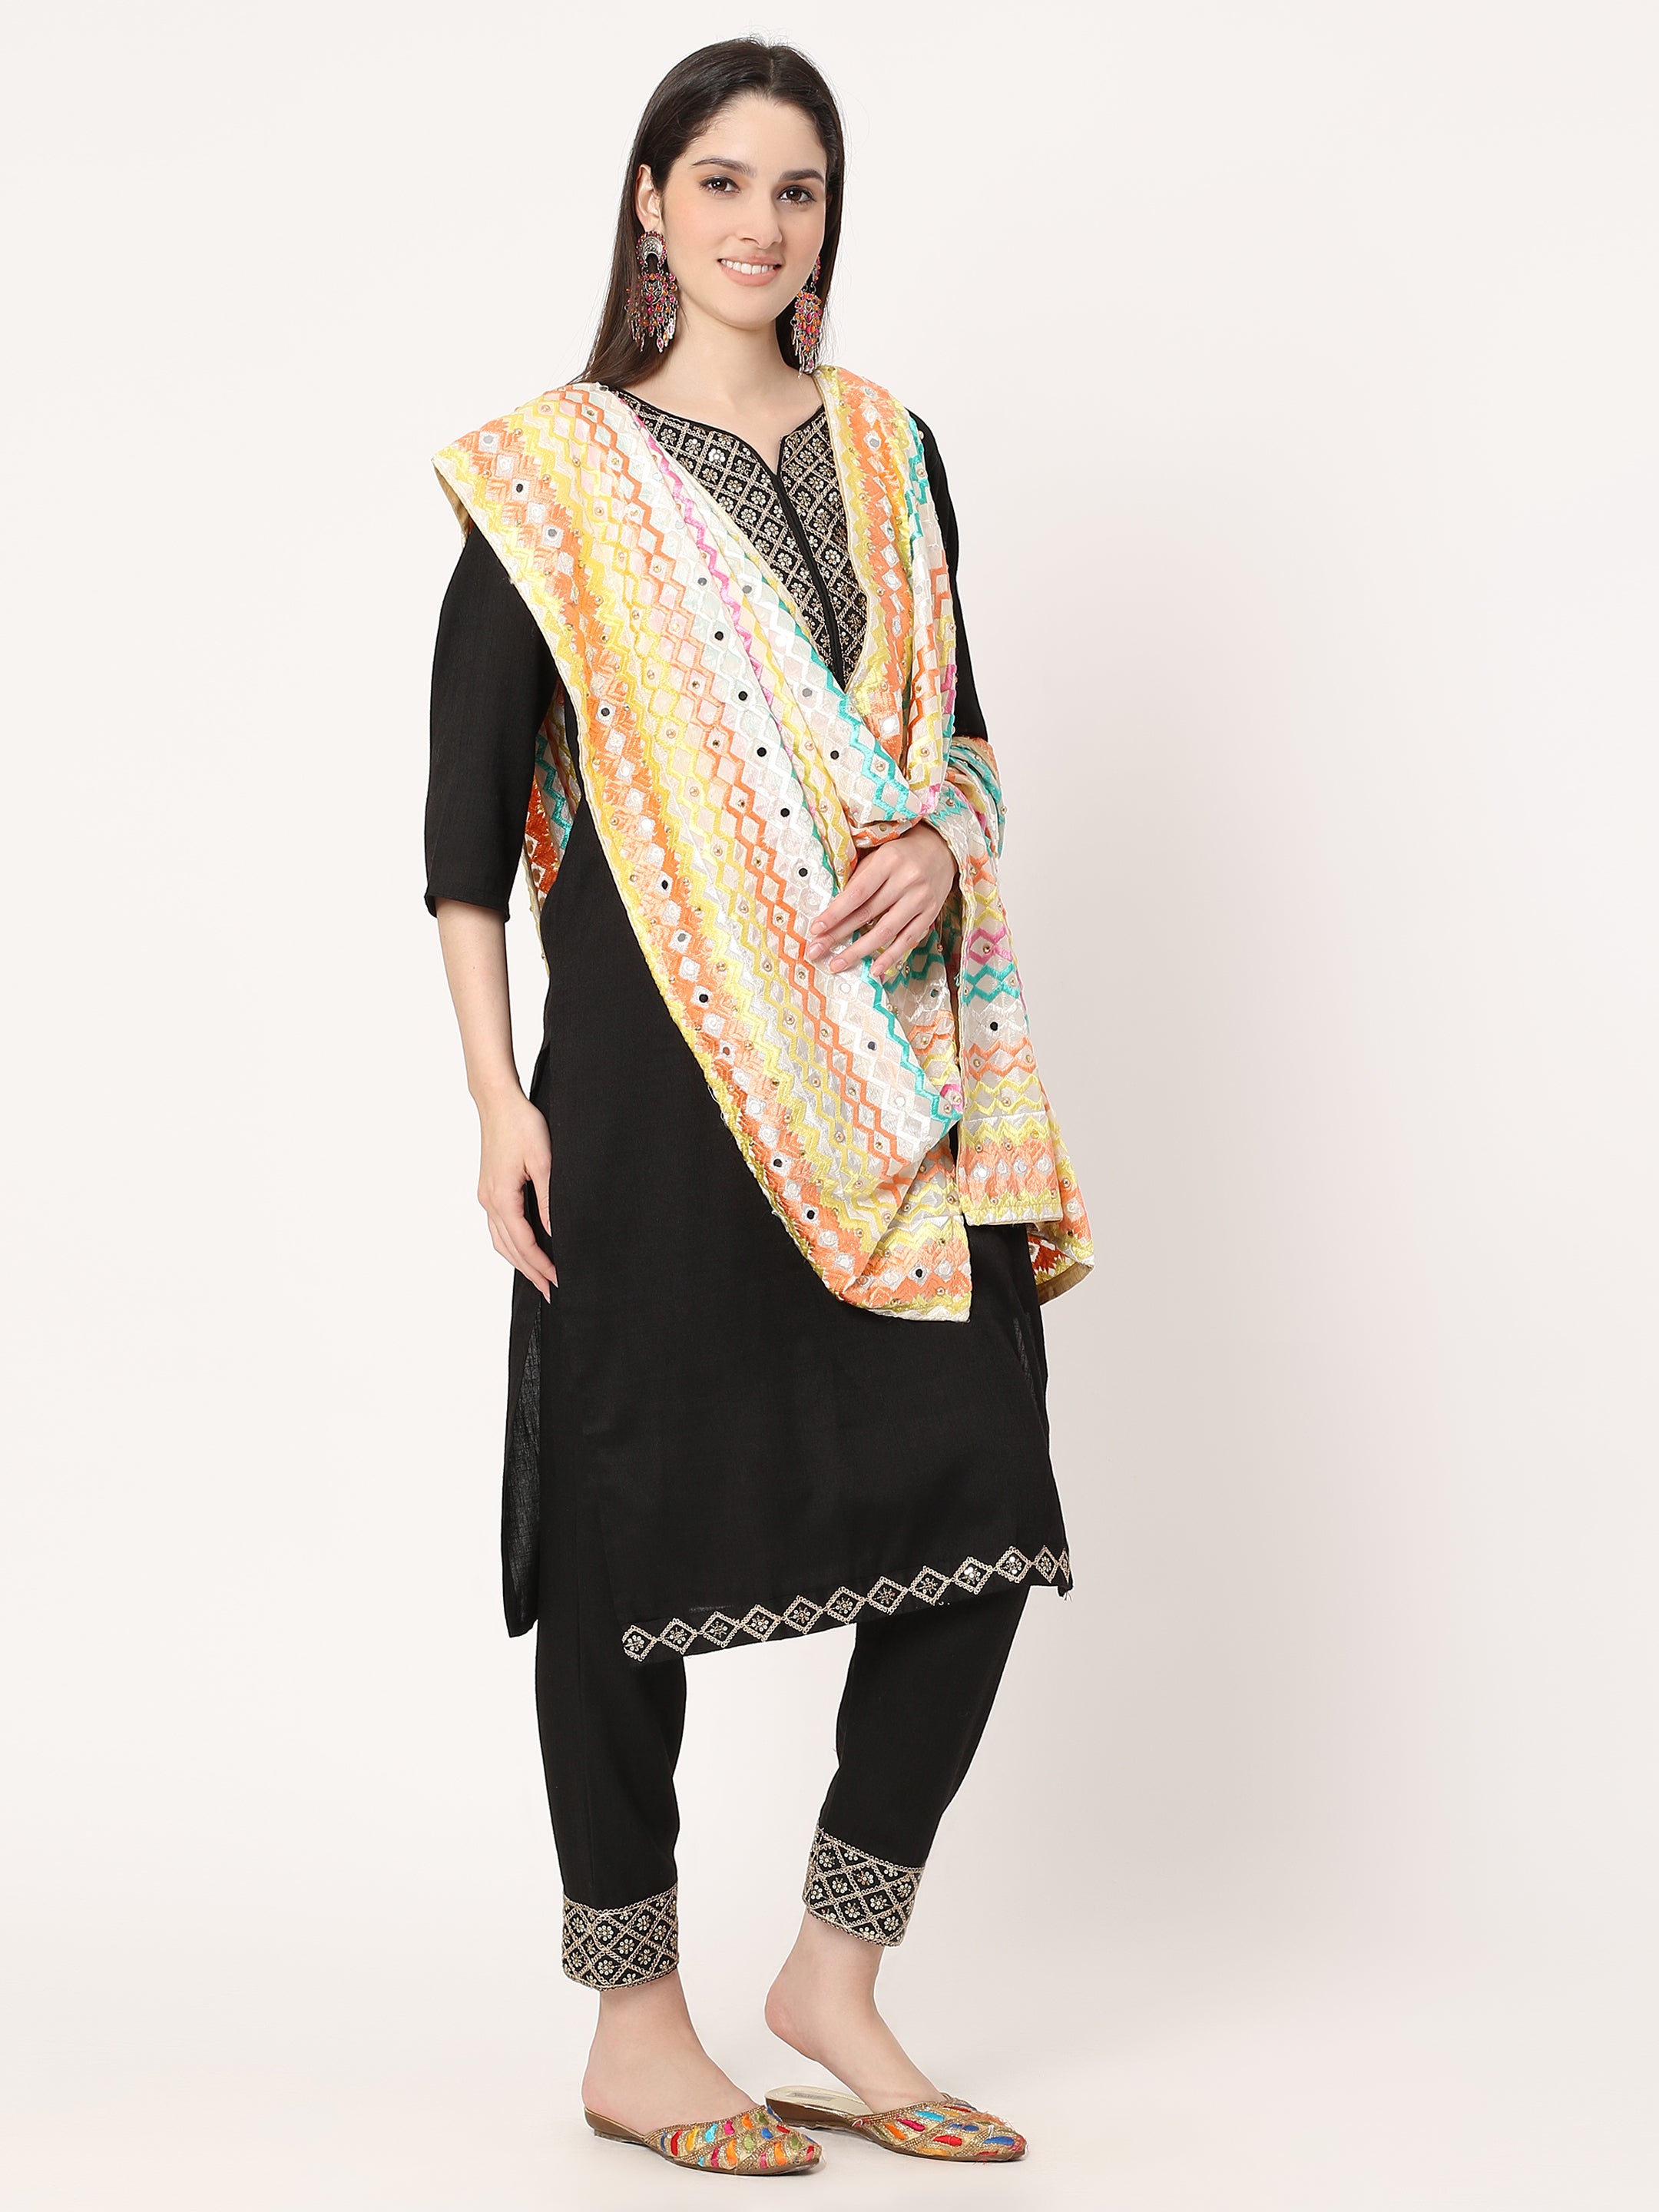 off-white-multicolour-embroidery-phulkari-dupatta-with-beads-and-pearl-mcrcpd0204-moda-chales-6